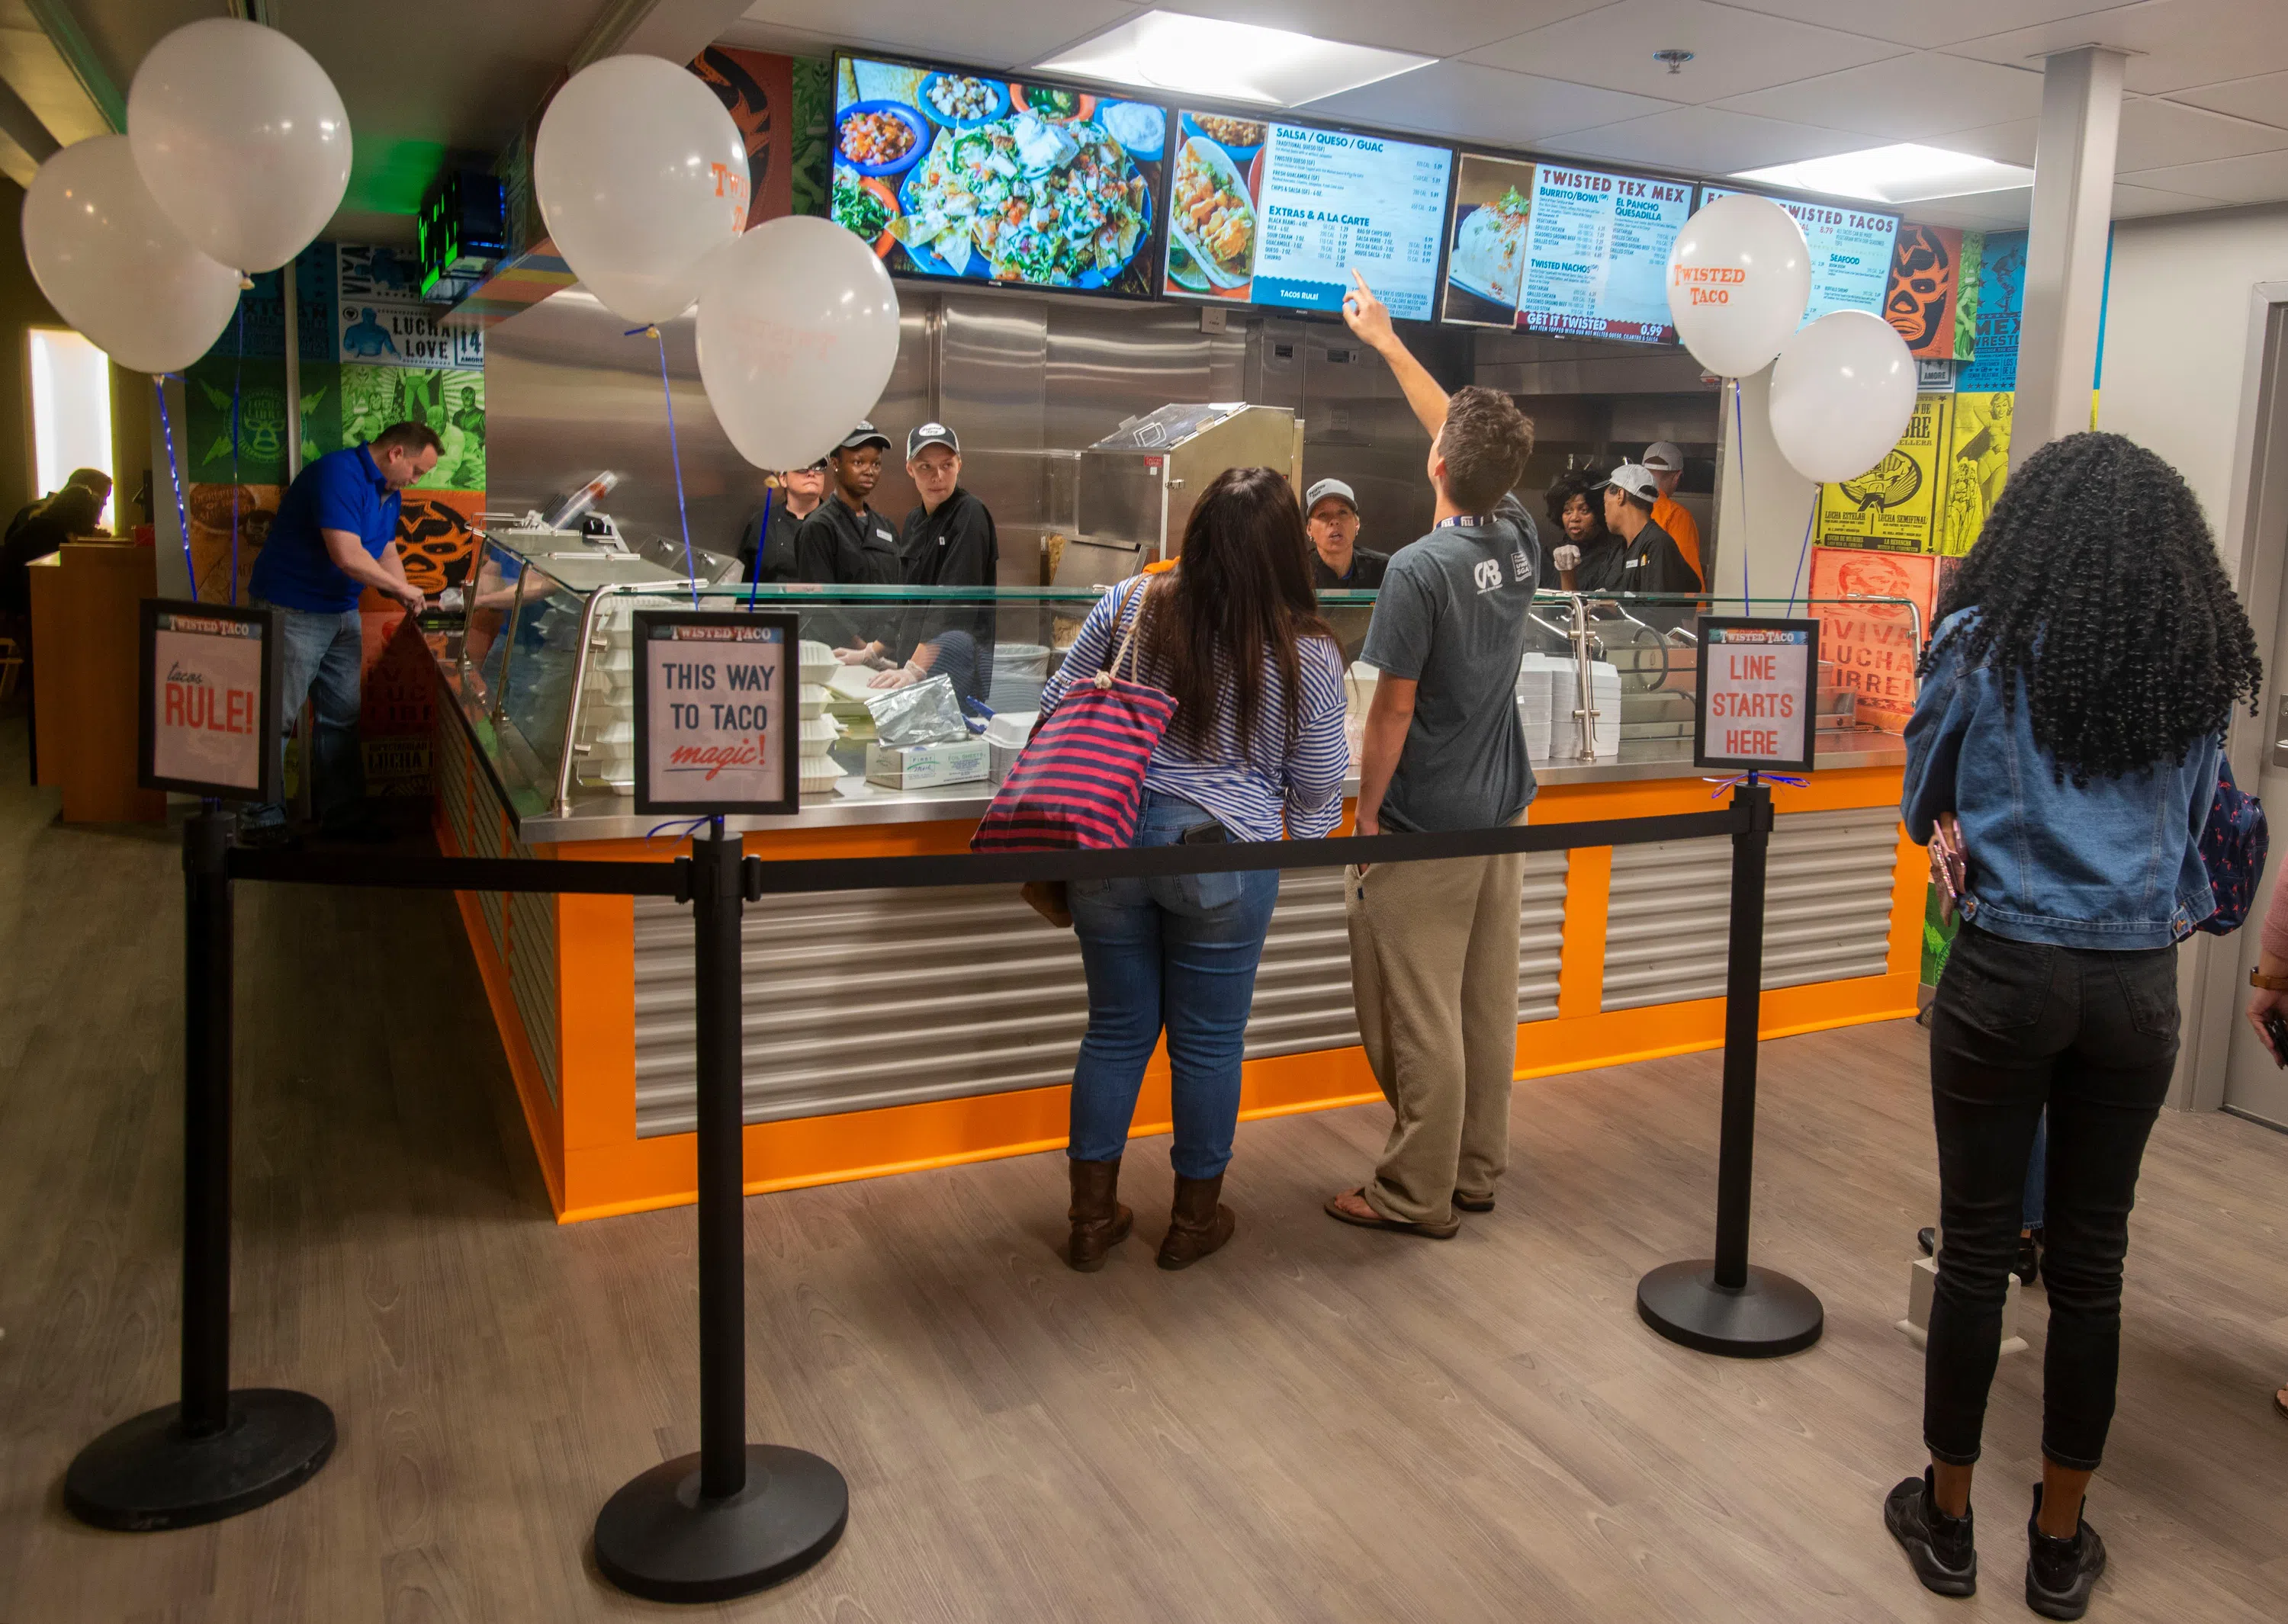 Students in line at the counter of Twisted Taco, an American Mexican Cantina fusing new American and bold Mexican flavors to form a one of a kind “Twist” on Mexican cuisine. 